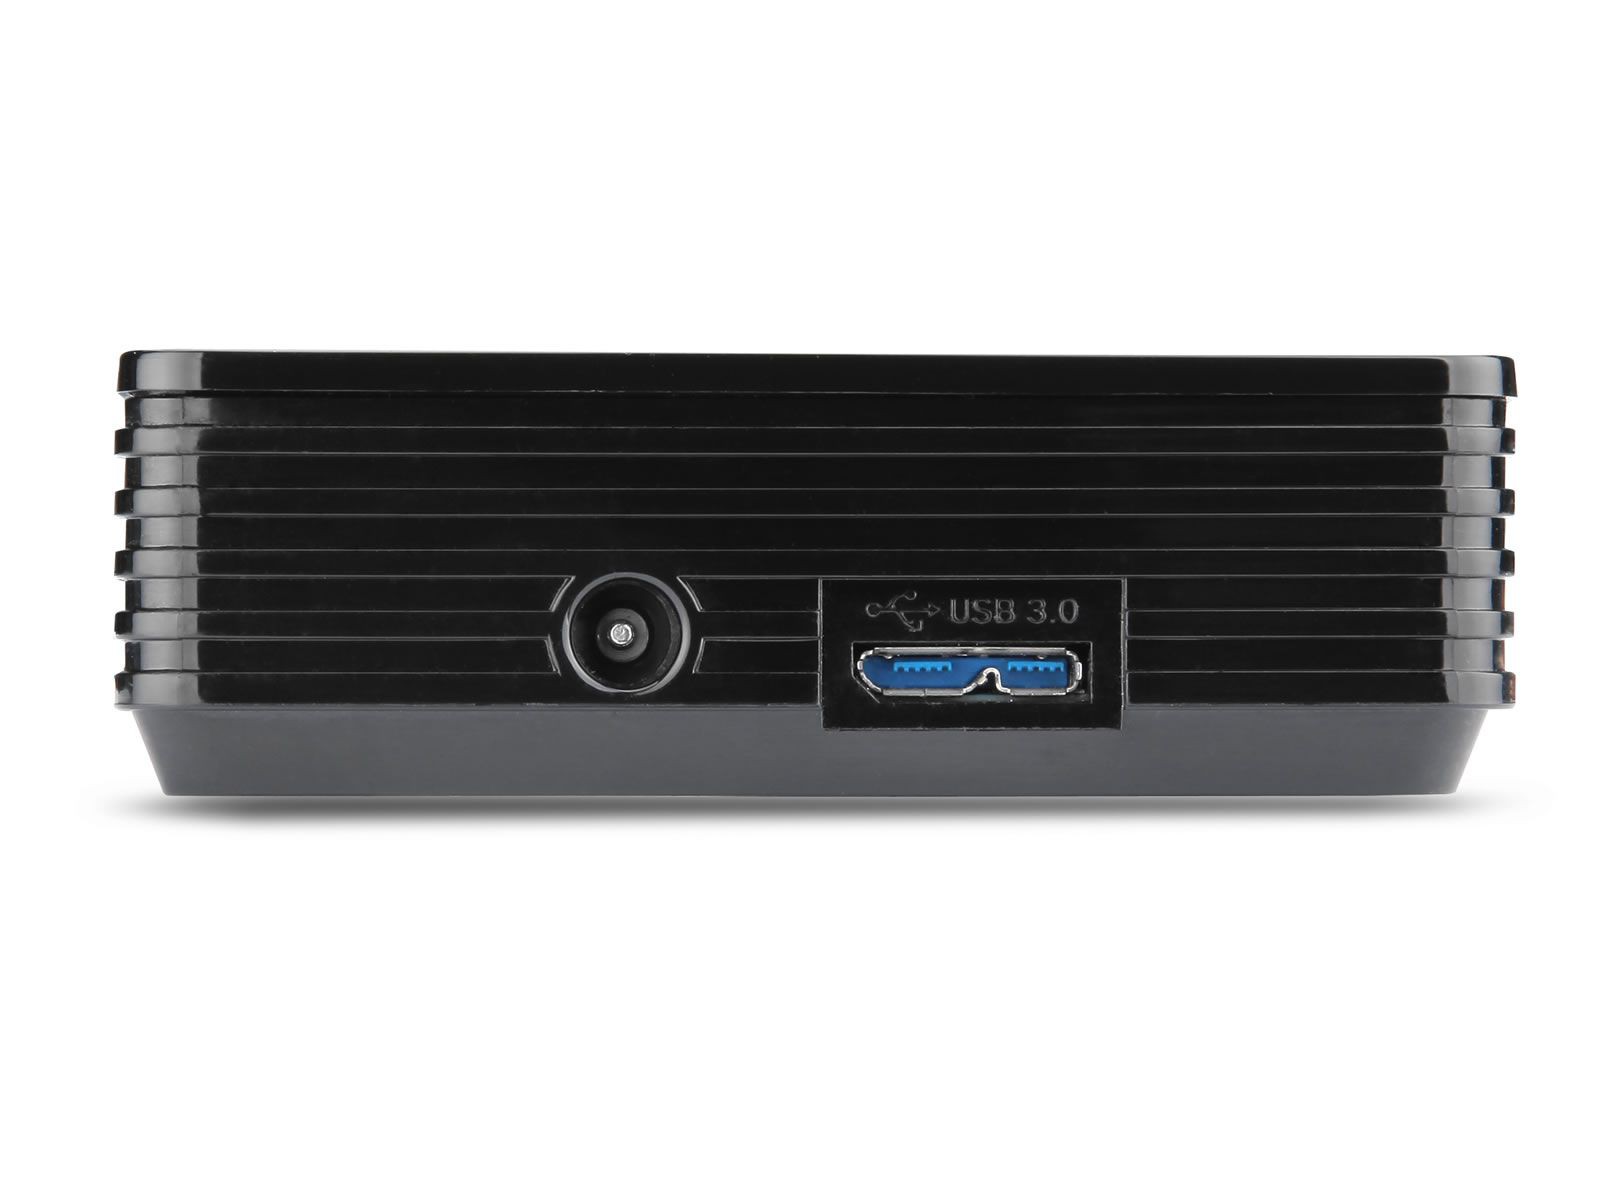 acer c120 projector driver download